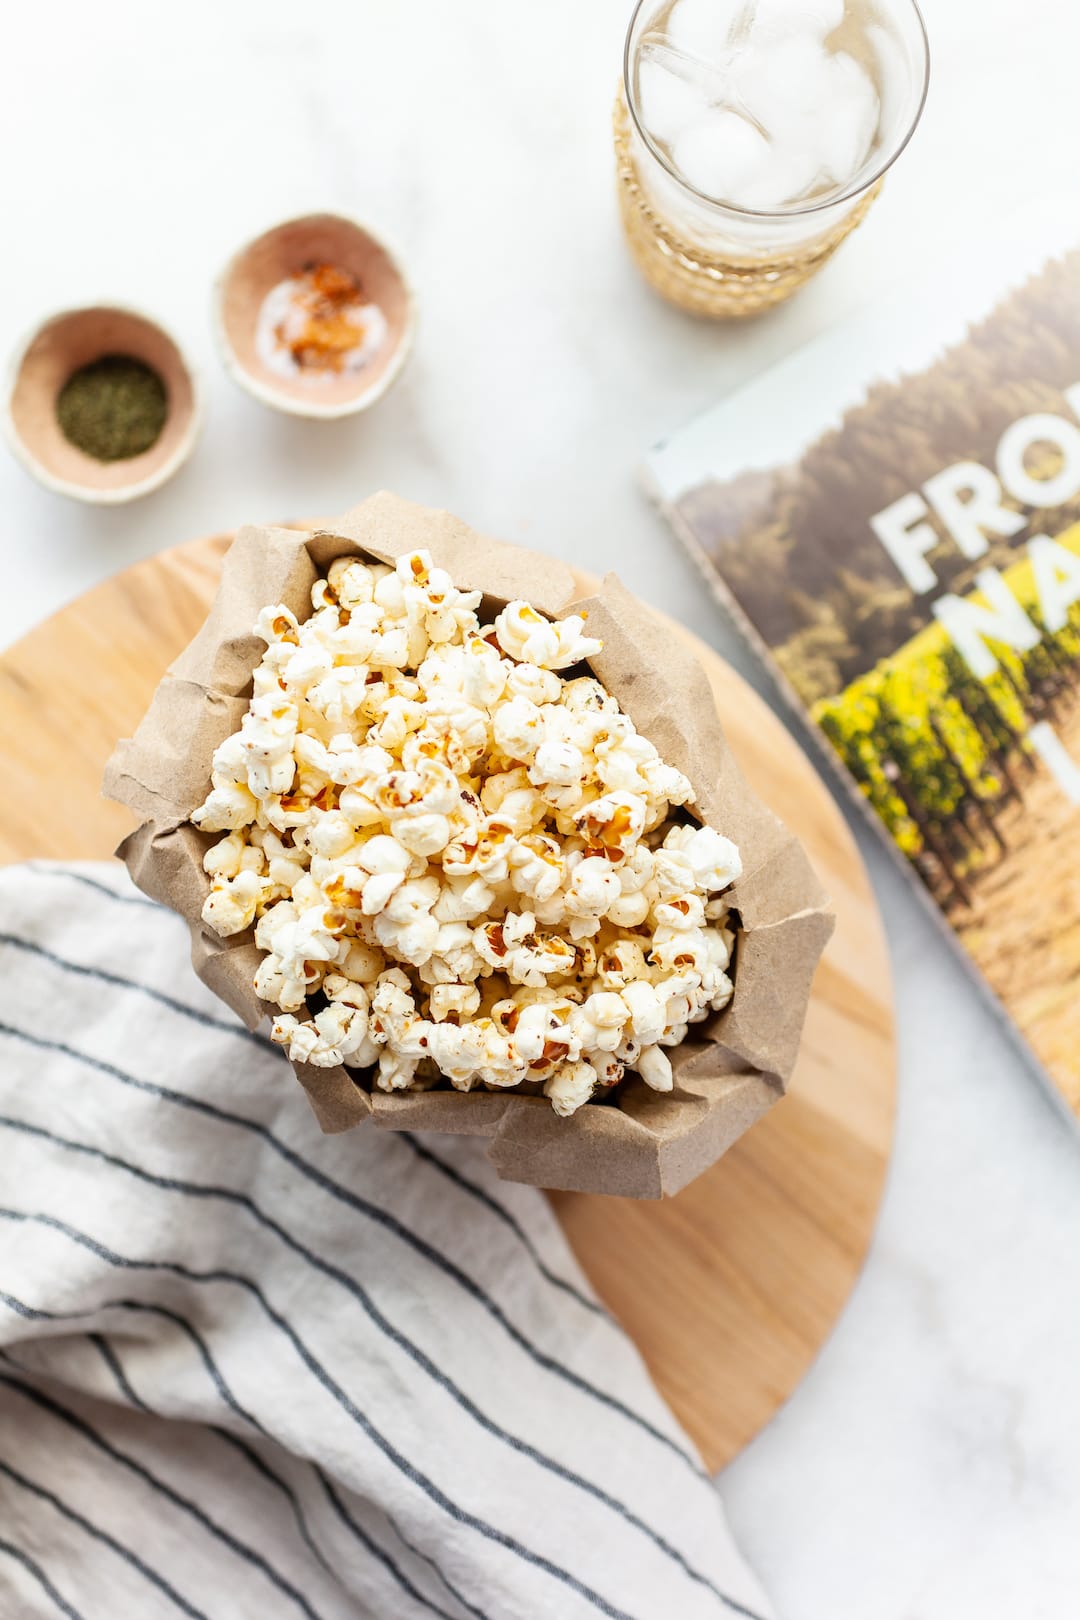 instant pot popcorn in a paper bag on a wooden board with a book beside it for styling